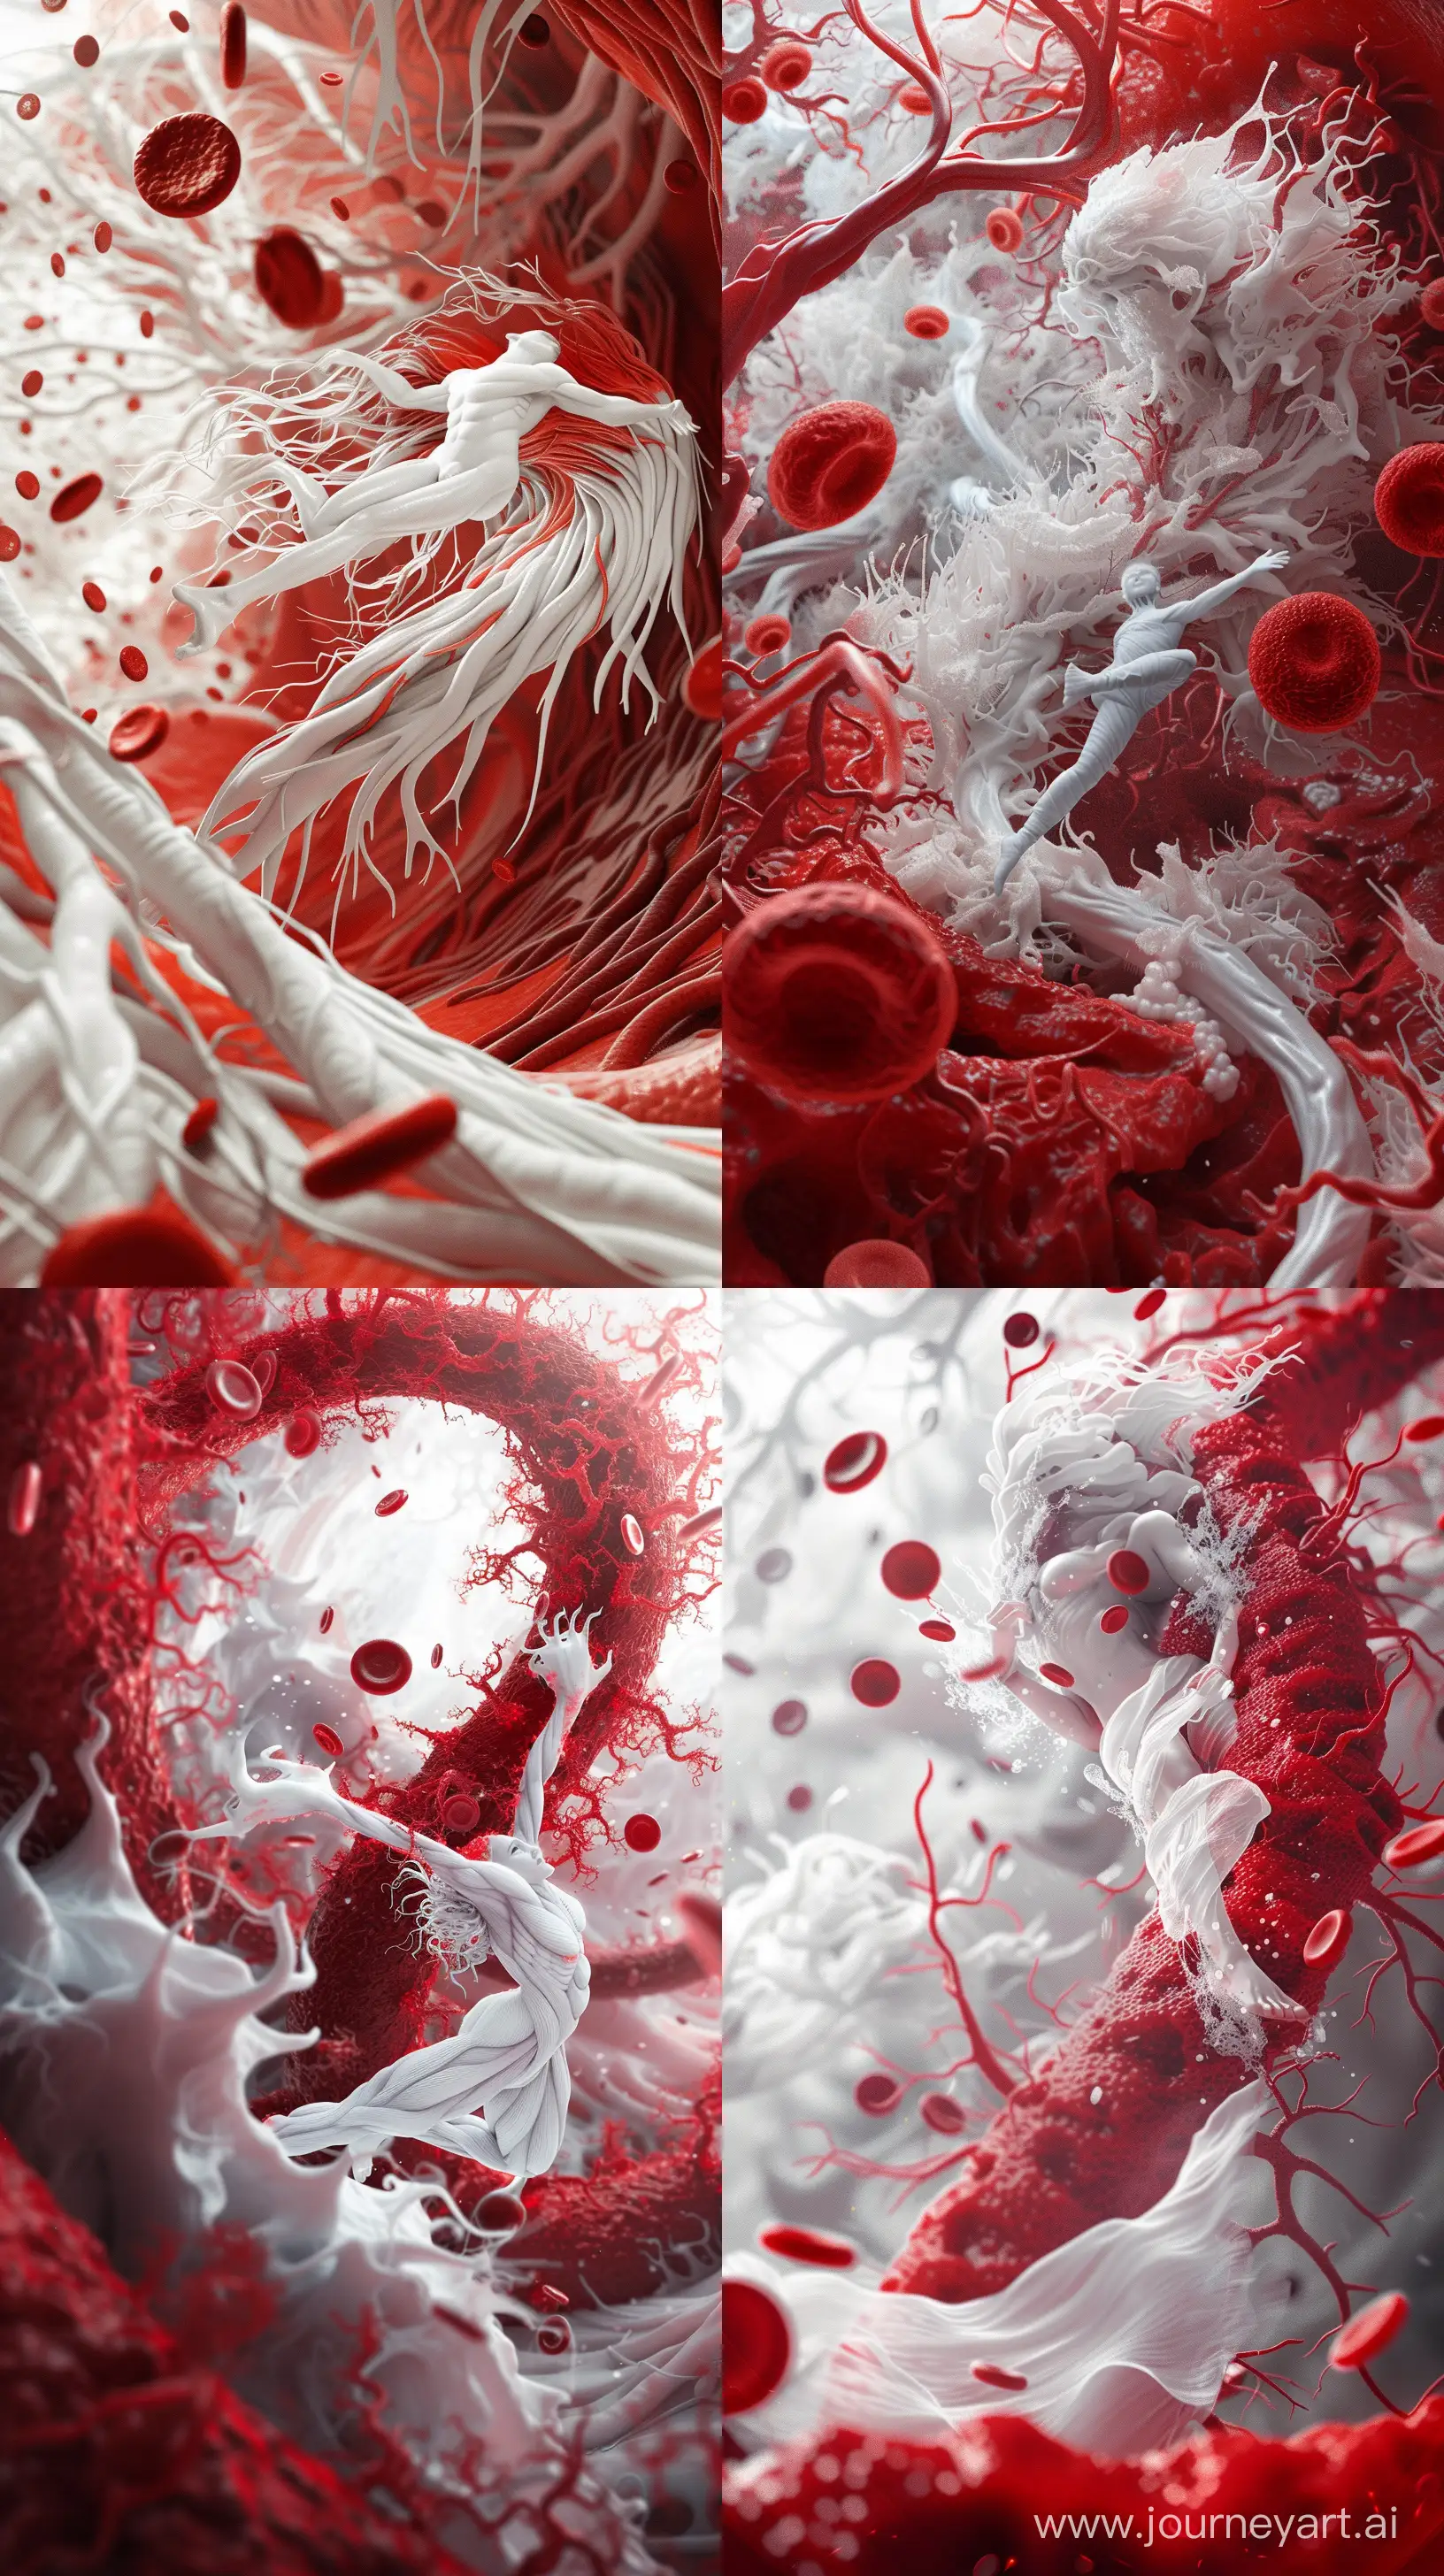 Alberto-Fernandez-as-a-White-Blood-Cell-in-Detailed-Artery